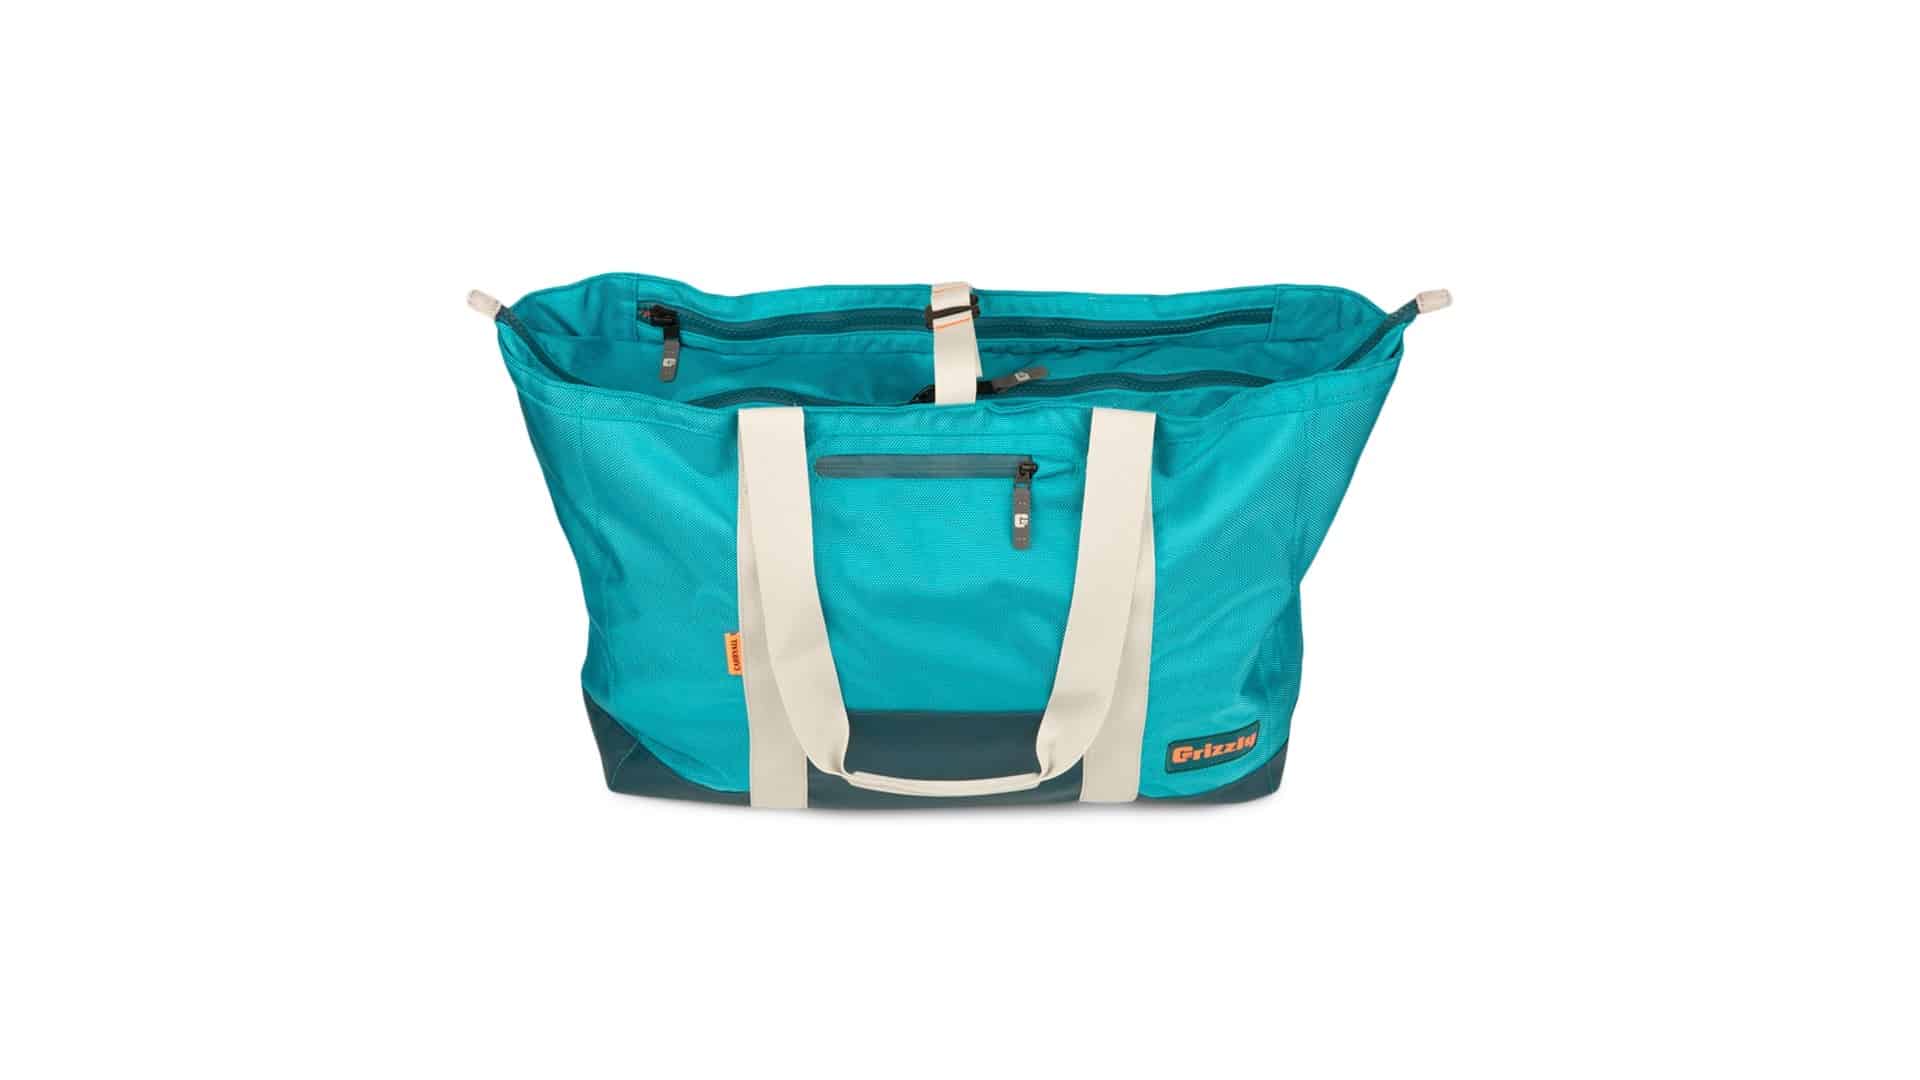 Introducing The Drifter Carryall Cooler Bags | Grizzly Coolers